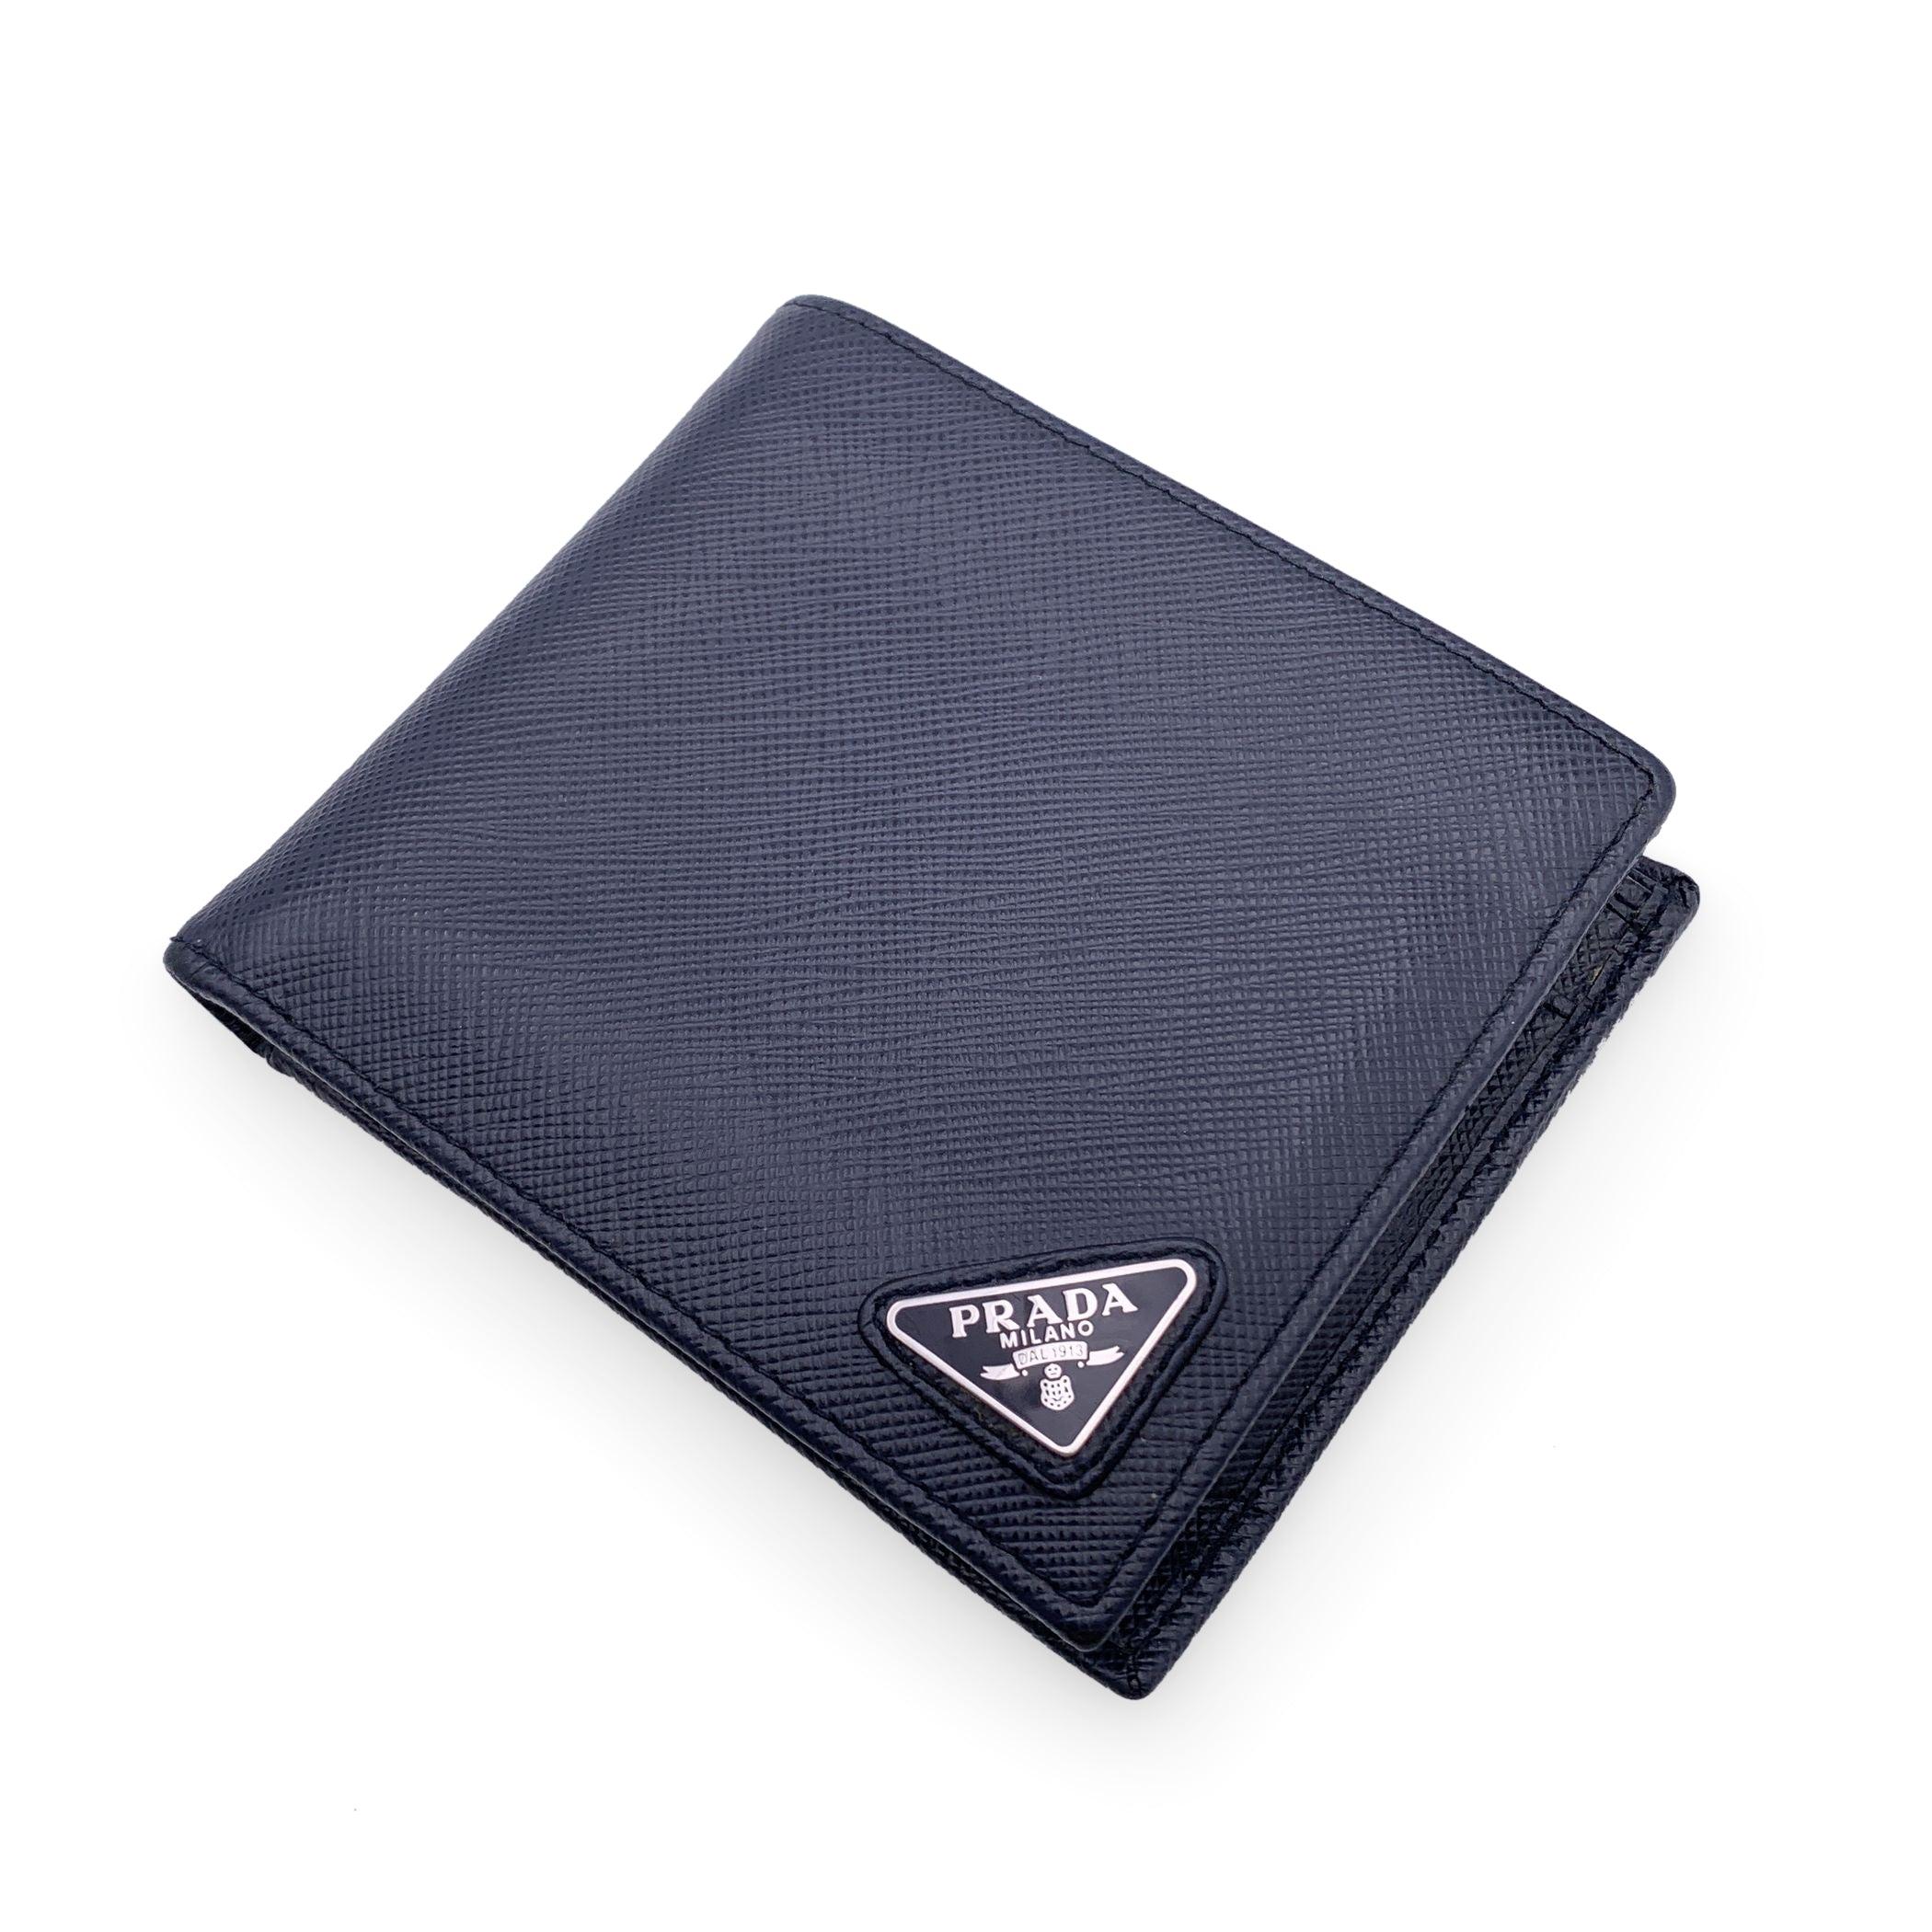 Prada Blue Saffiano leather Bifold Wallet. Bifold design. Prada triangle logo tab on the front. 2 bill compartments, 4 credit card slots and 2 open pockets inside. Leather lining. 'Prada - Made in Italy' engraved inside. Condition B - VERY GOOD